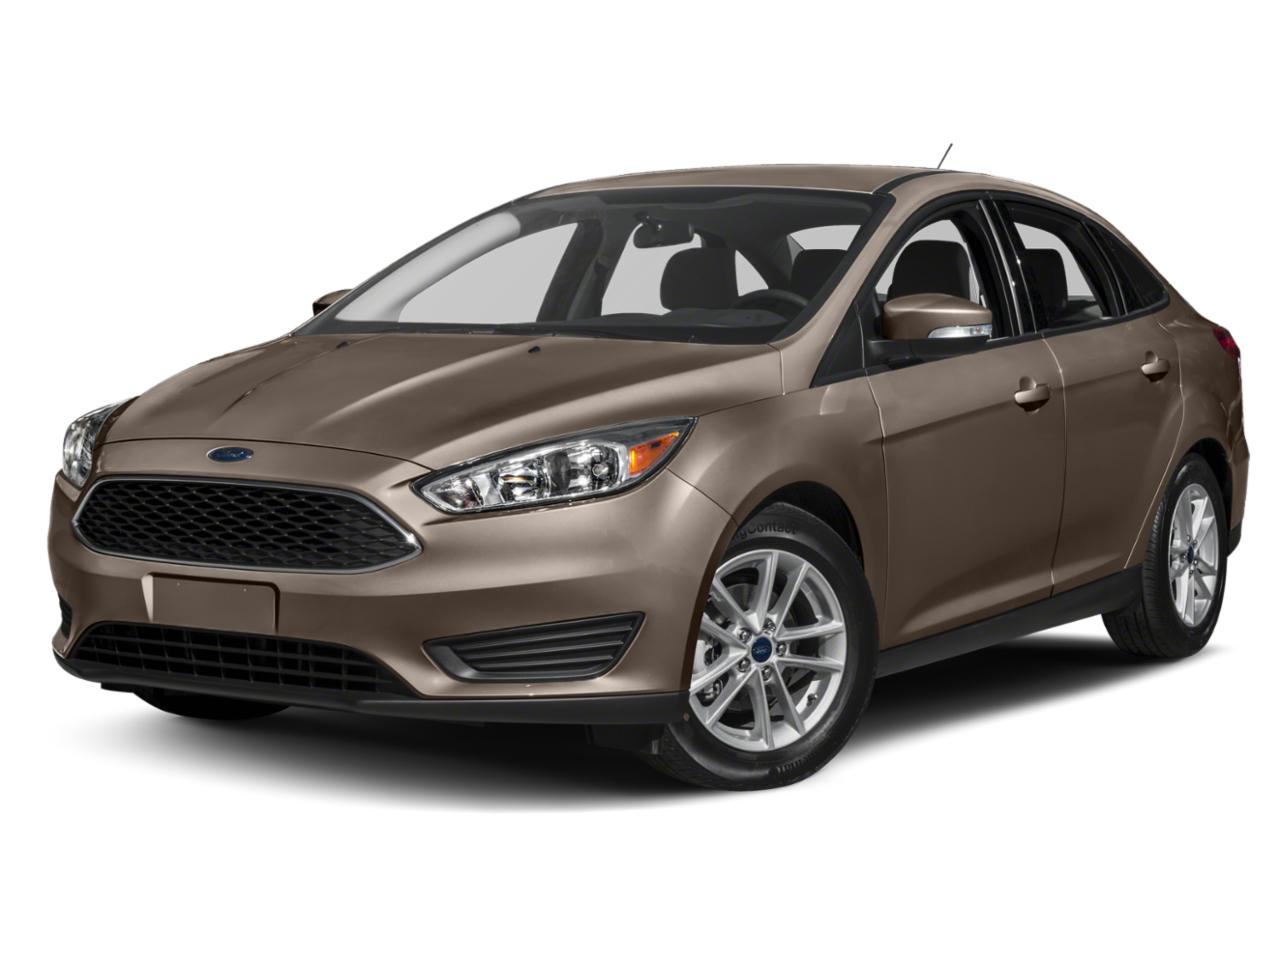 2018 Ford Focus Vehicle Photo in ELYRIA, OH 44035-6349